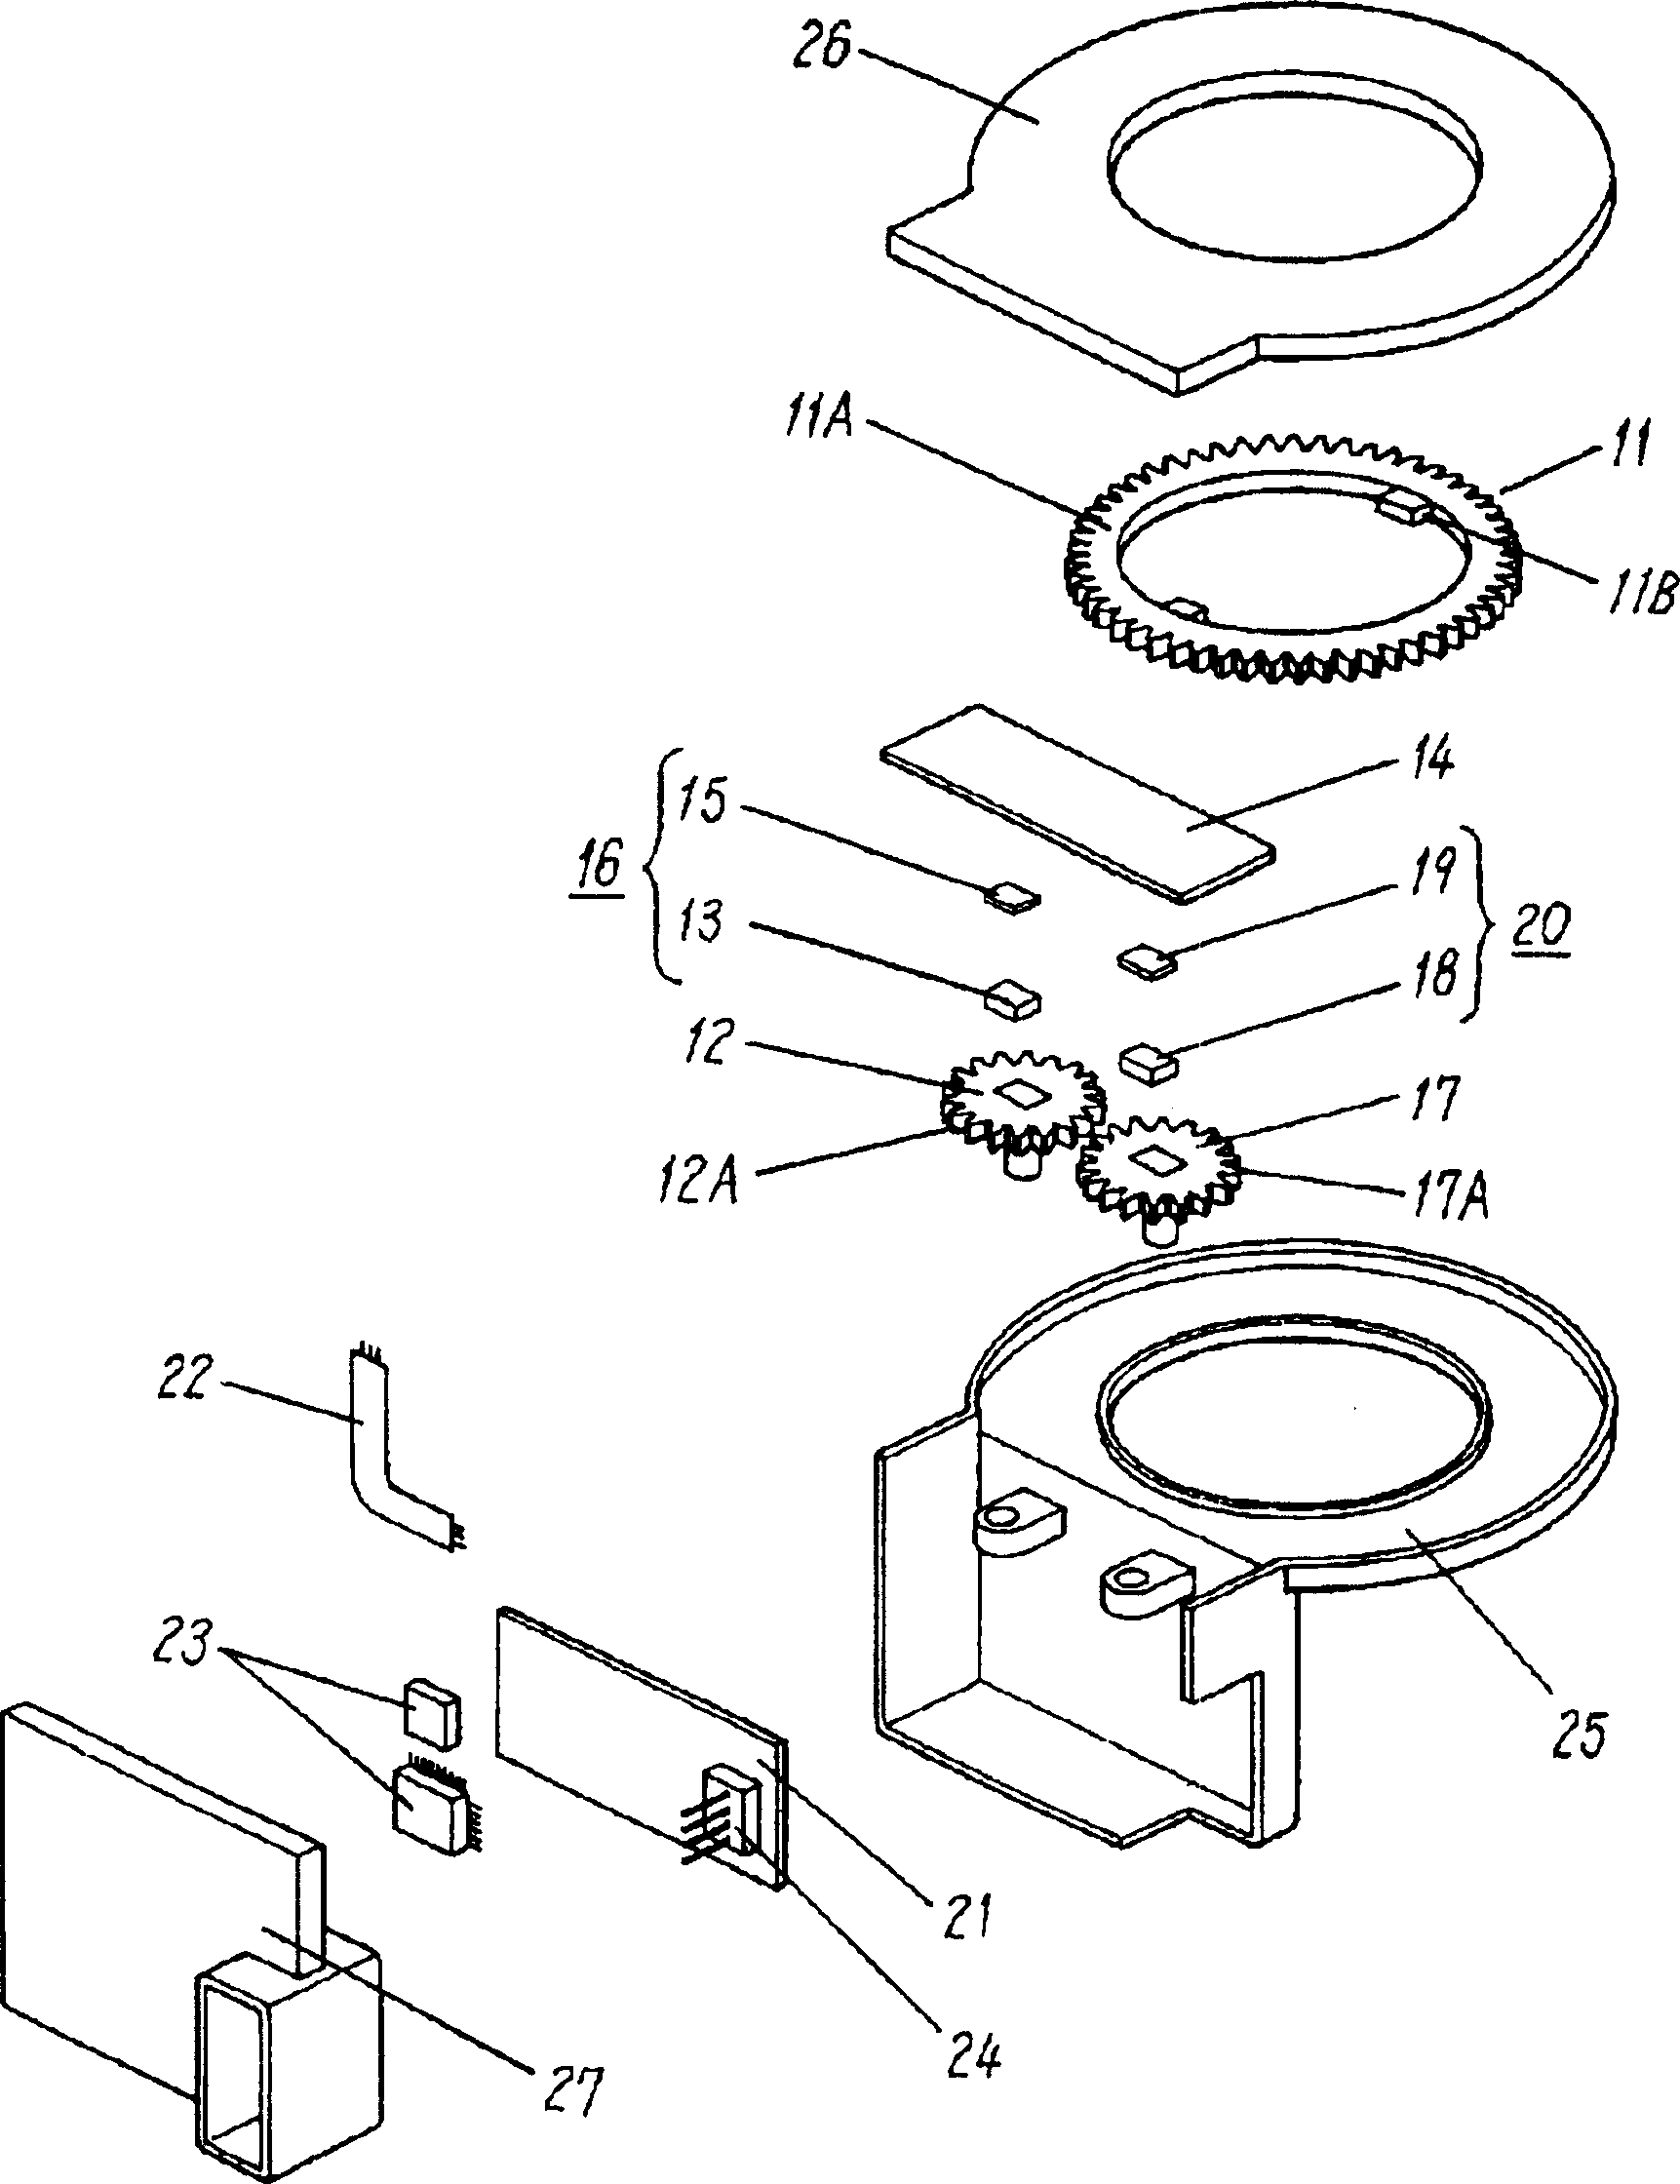 Detecting apparatus for angle of rotation